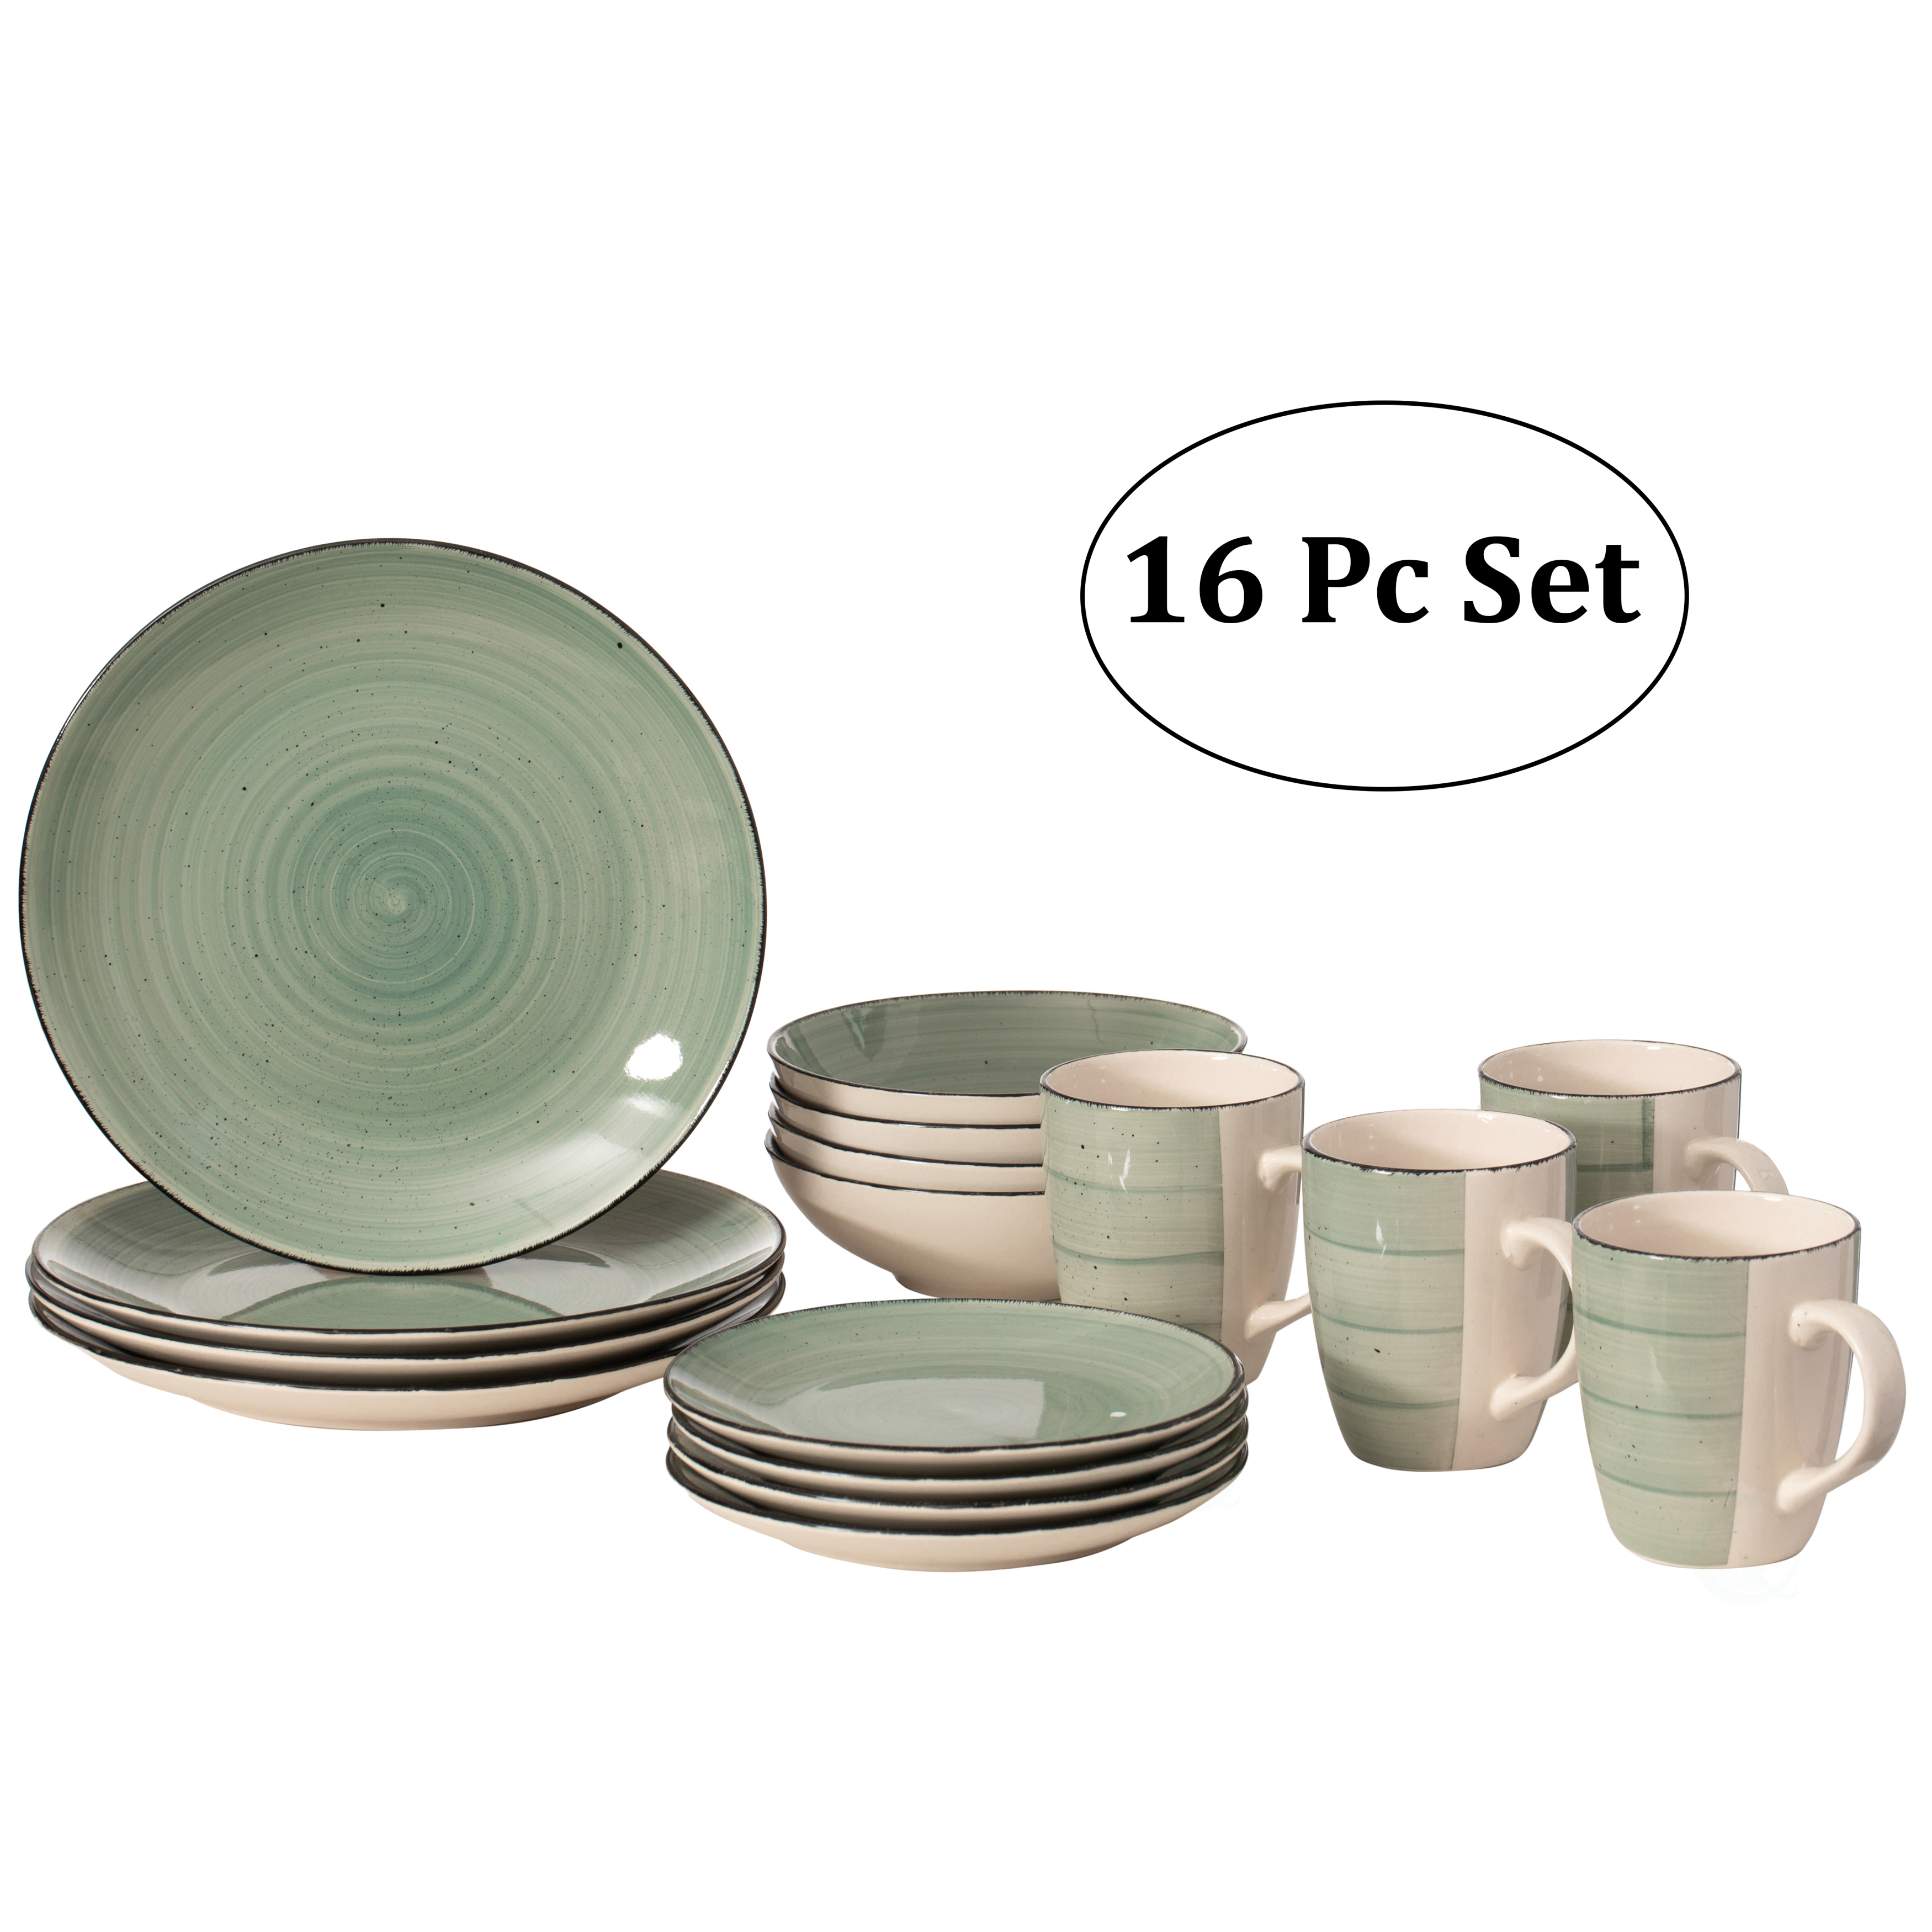 16 PC Spin Wash Dinnerware Dish Set for 4 Person Mugs, Salad and Dinner Plates and Bowls Sets, Dishwasher and Microwave Safe - Green